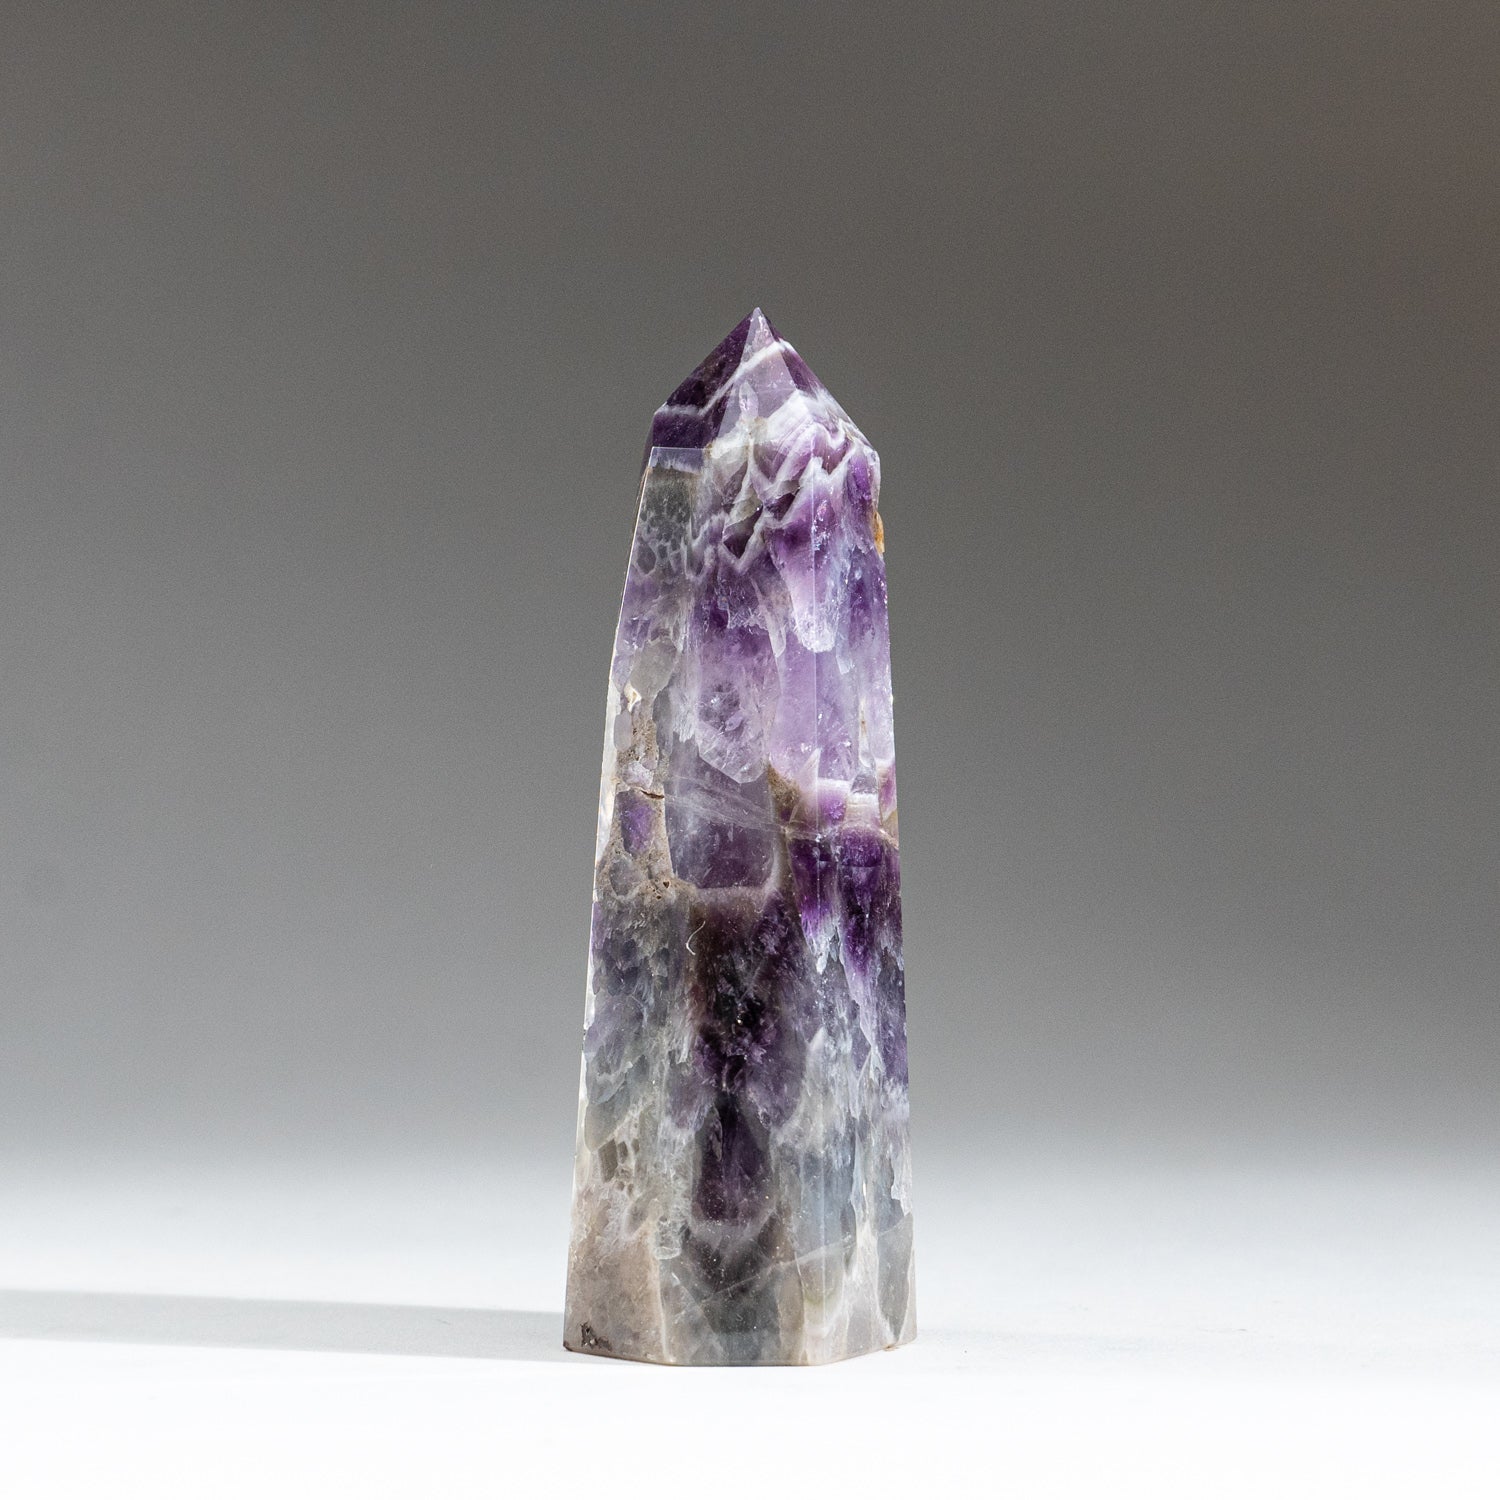 Polished Chevron Amethyst Point from Brazil (202.7 grams)